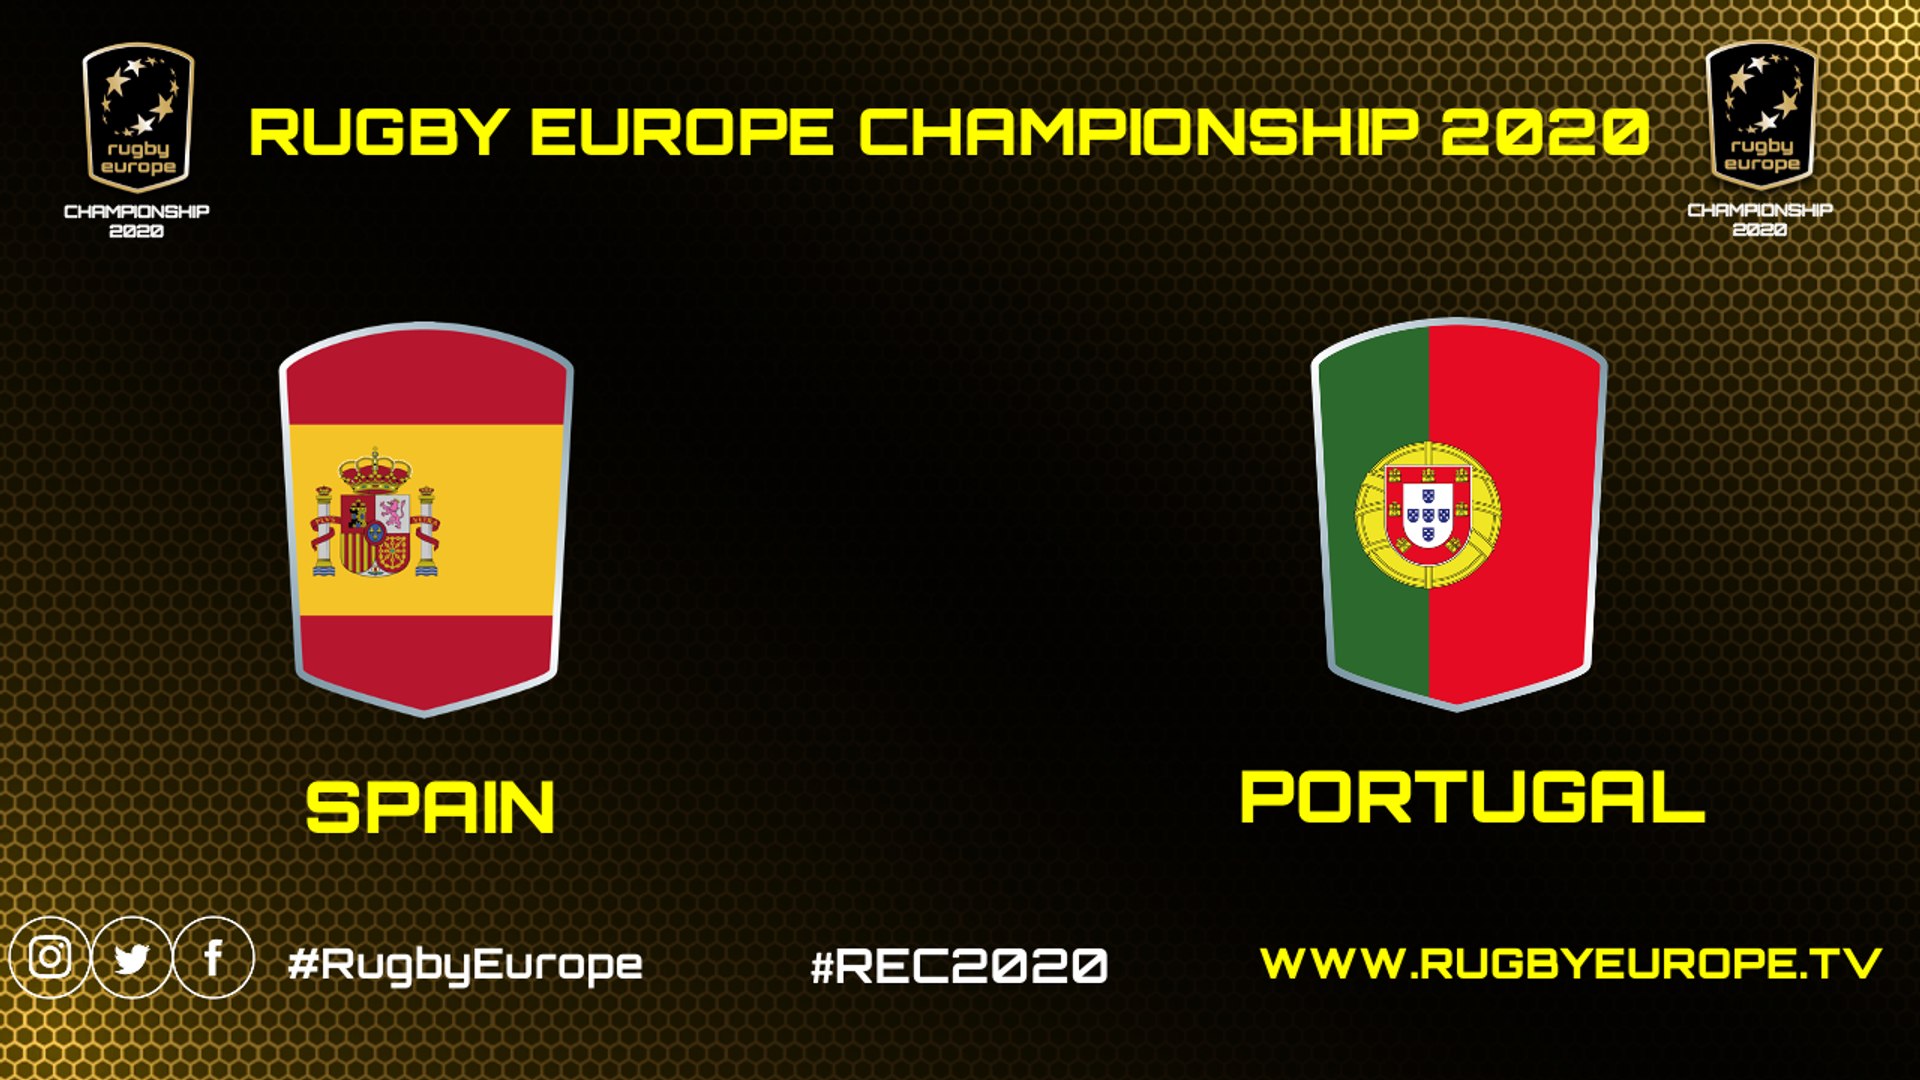 SPAIN / PORTUGAL - RUGBY EUROPE CHAMPIONSHIP 2020